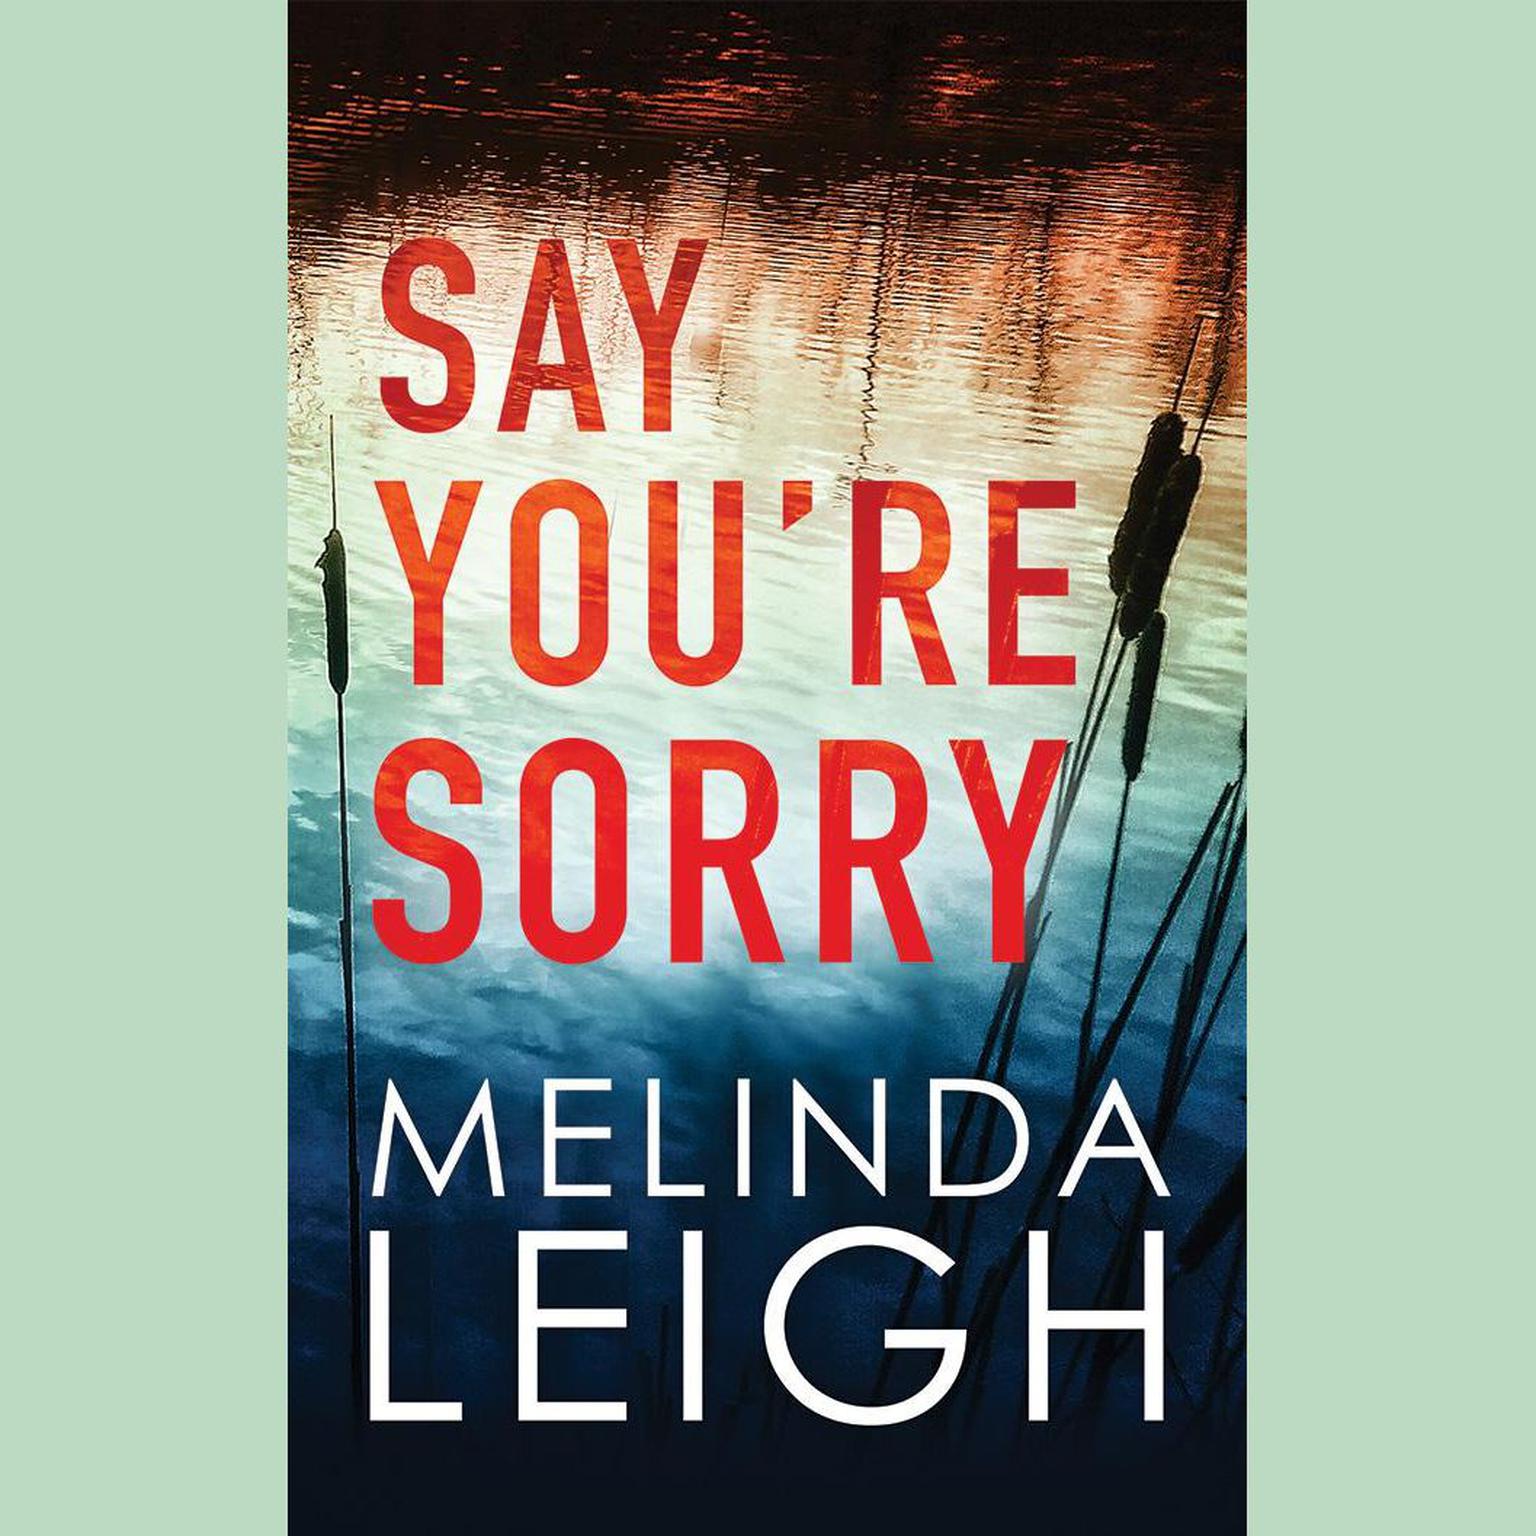 Say Youre Sorry Audiobook, by Melinda Leigh